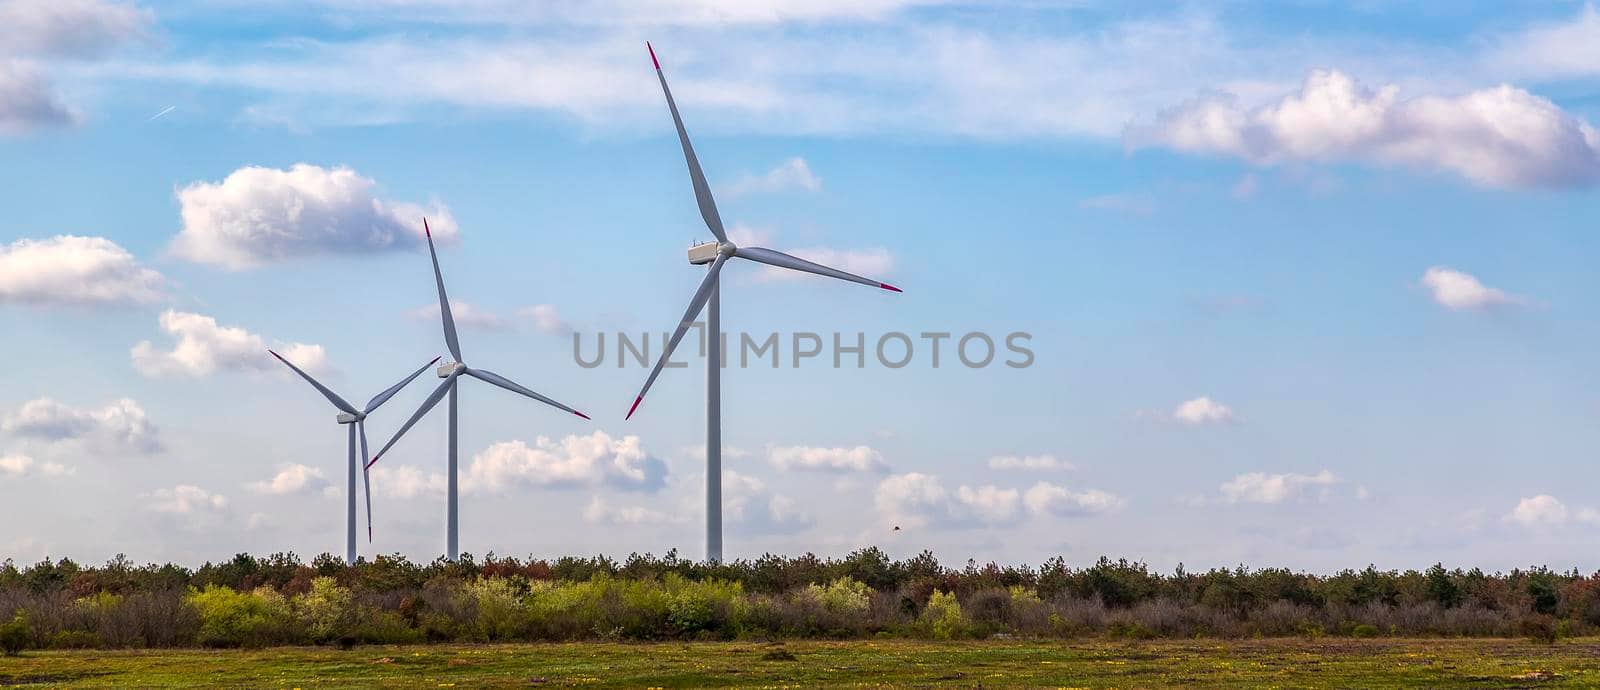 Panoramic view of a wind turbine farm the blue day sky